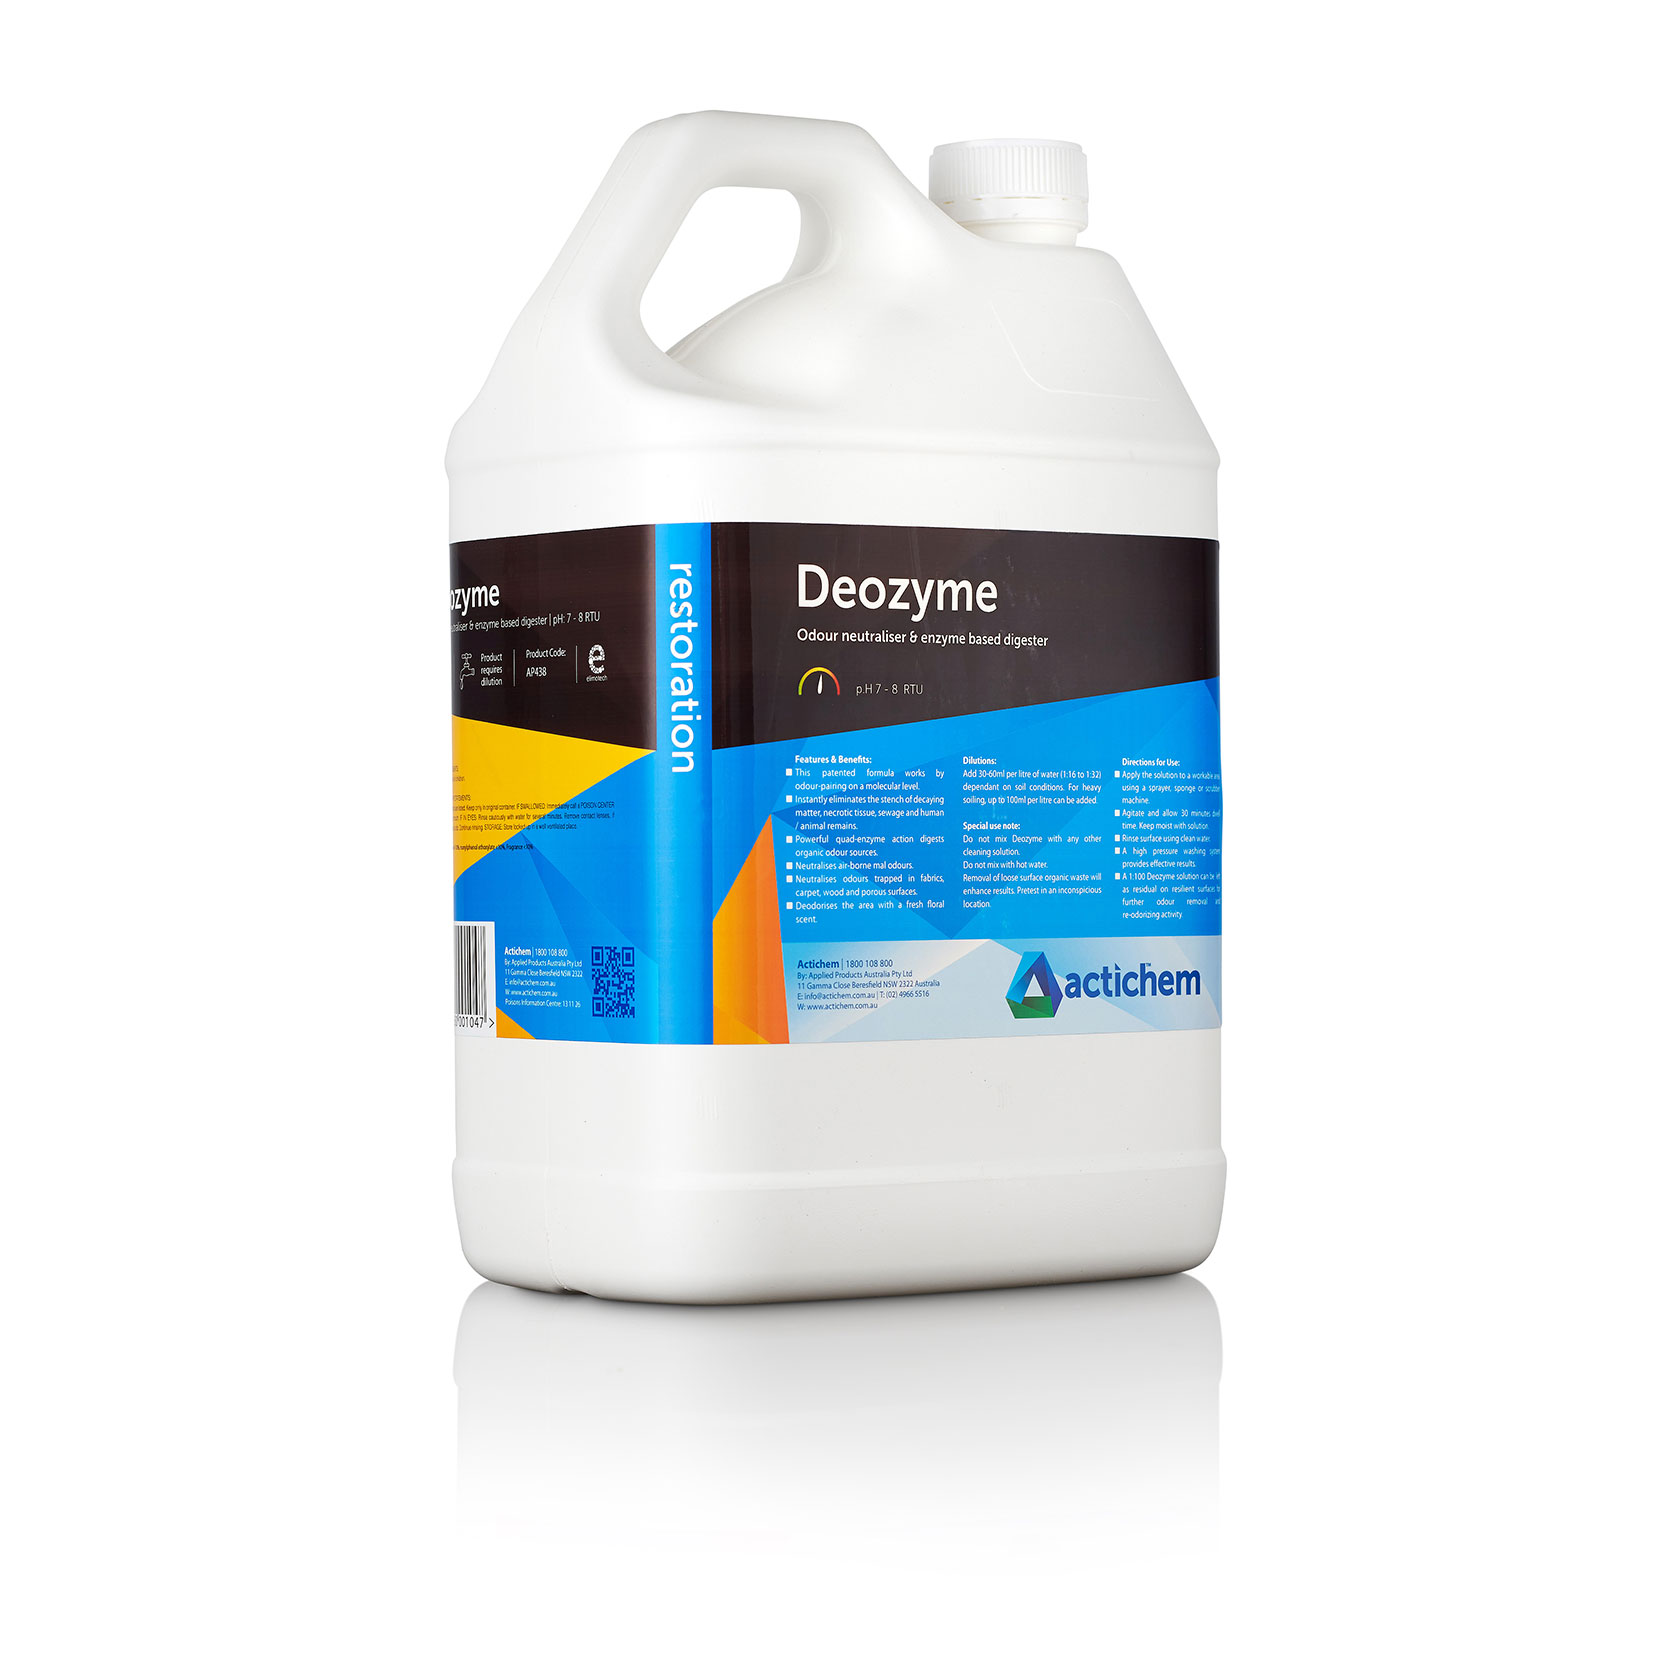 Actichem Deozyme Odour remover & enzyme digester